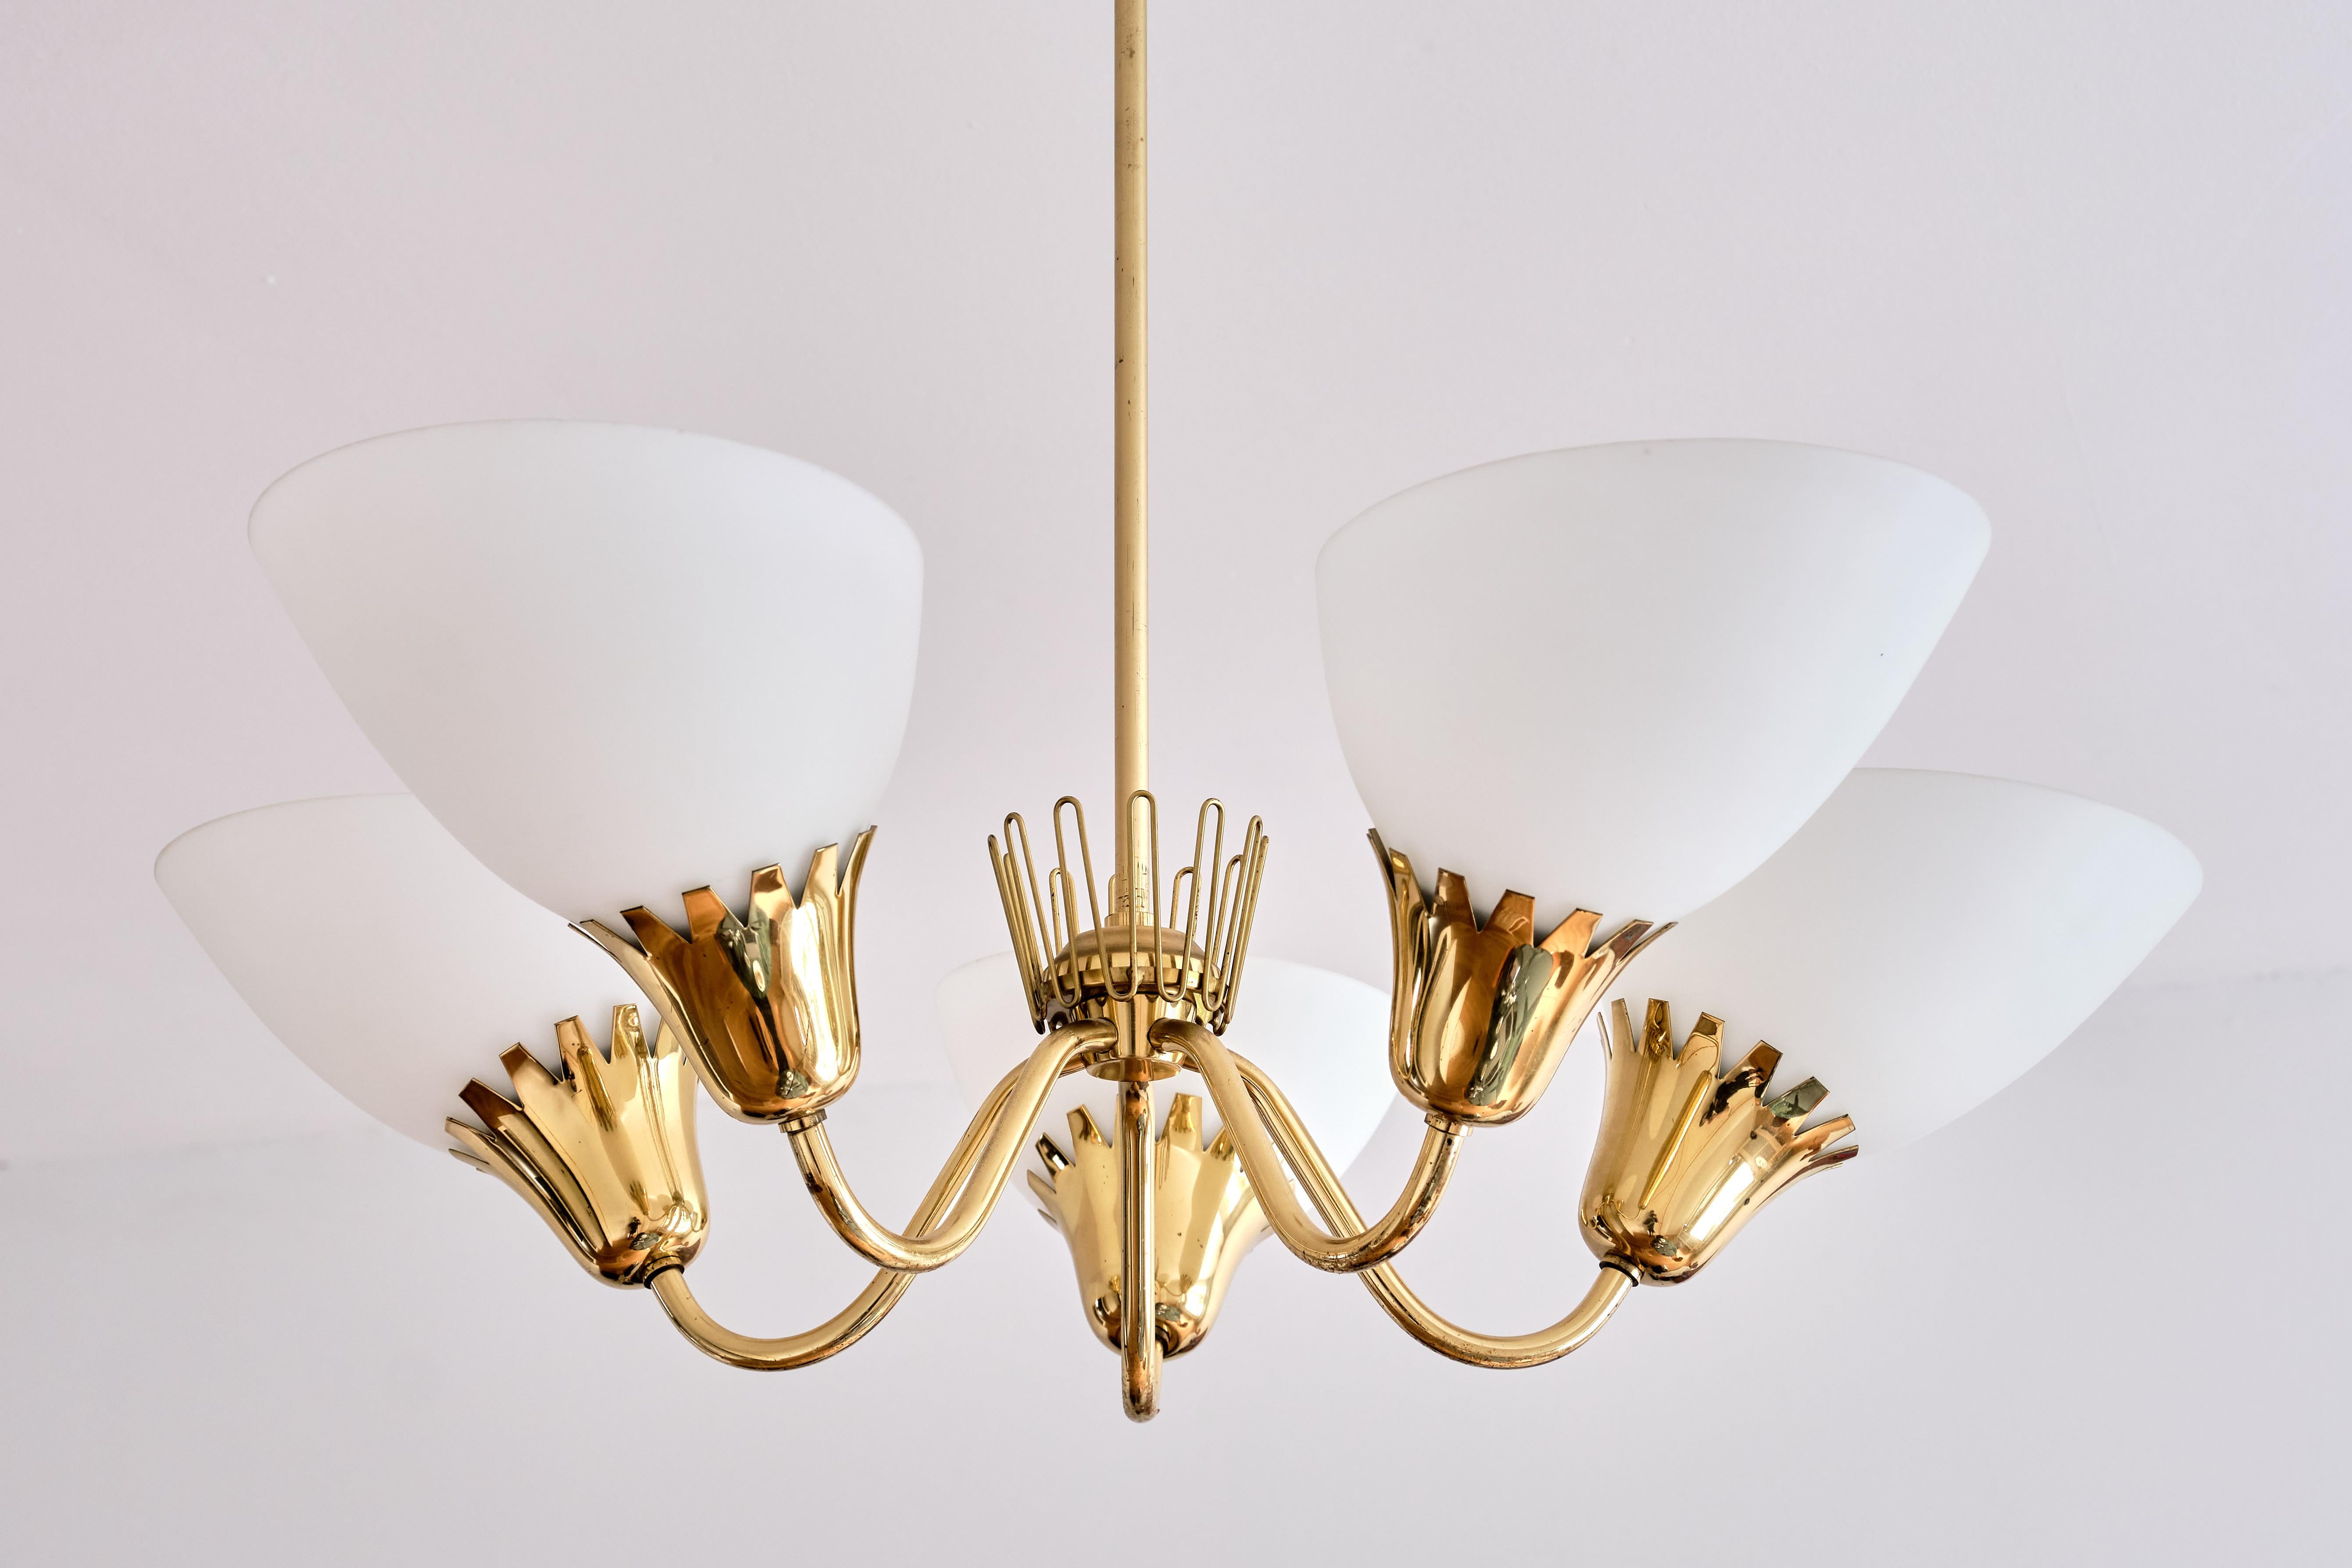 This rare five arm chandelier was produced by ASEA in Sweden in the early 1950s. Brass stem, five arms and fittings with matte opaline glass shades. The zigzag edges of the fittings and the decorative brass crown detail in the middle are